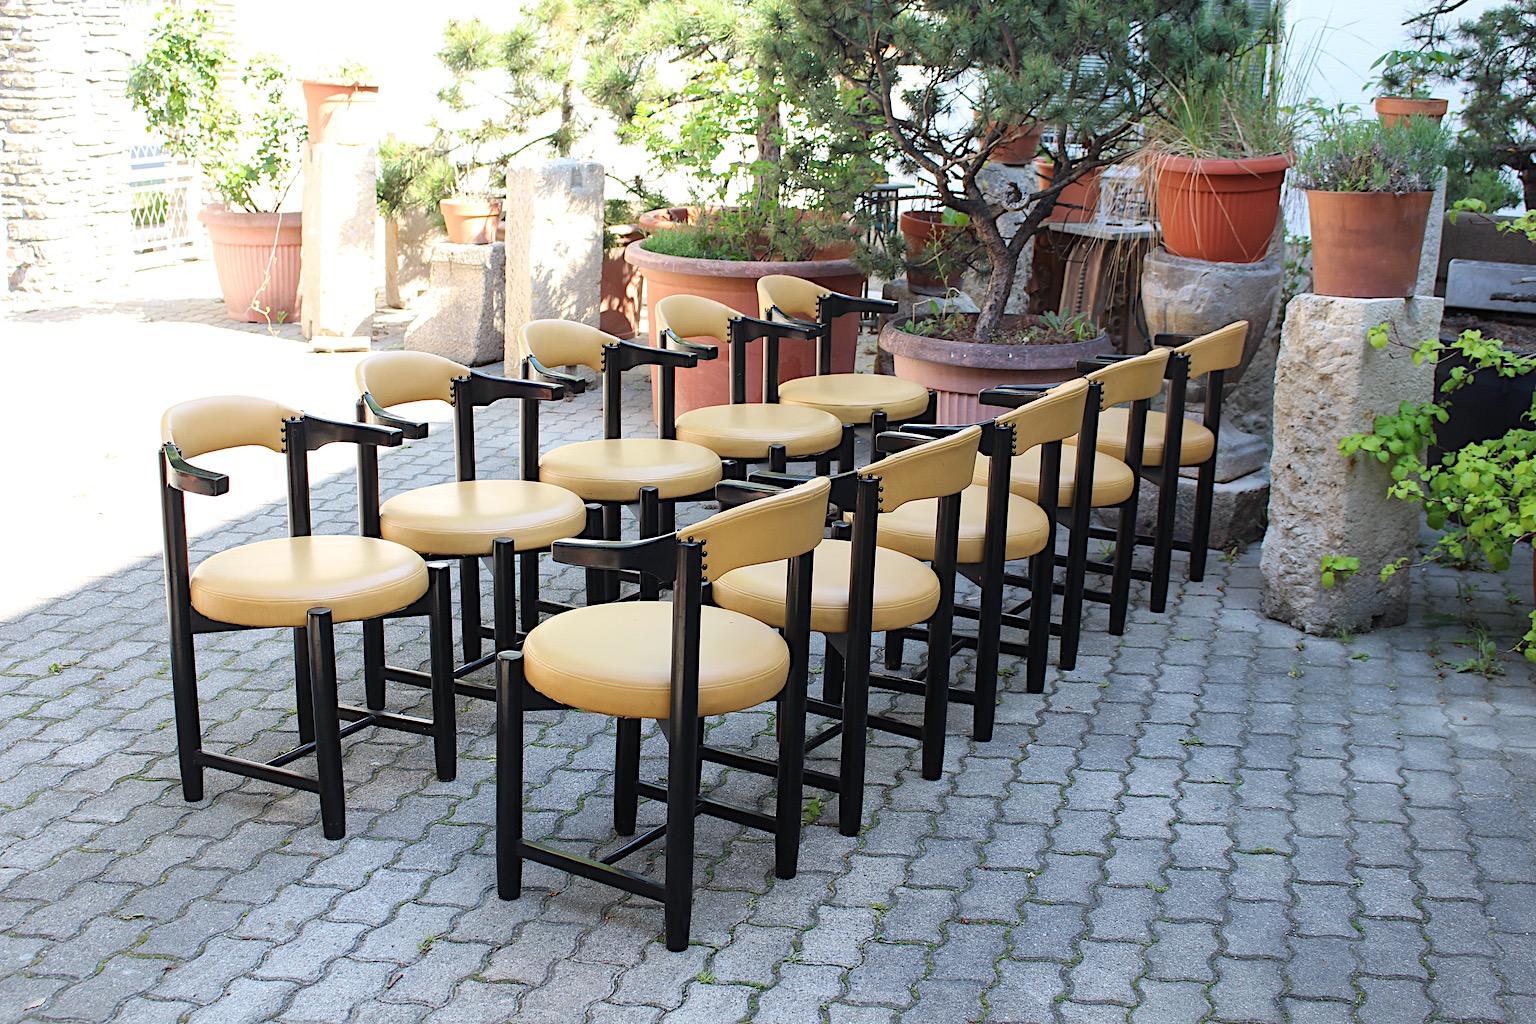 Modern vintage ten dining chairs or armchairs from beech and faux leather in black and yellow color Italy 1980s.
A beautiful set of 10 dining chairs with armrests a simple and bold color combination of black and mustard yellow from beech and faux